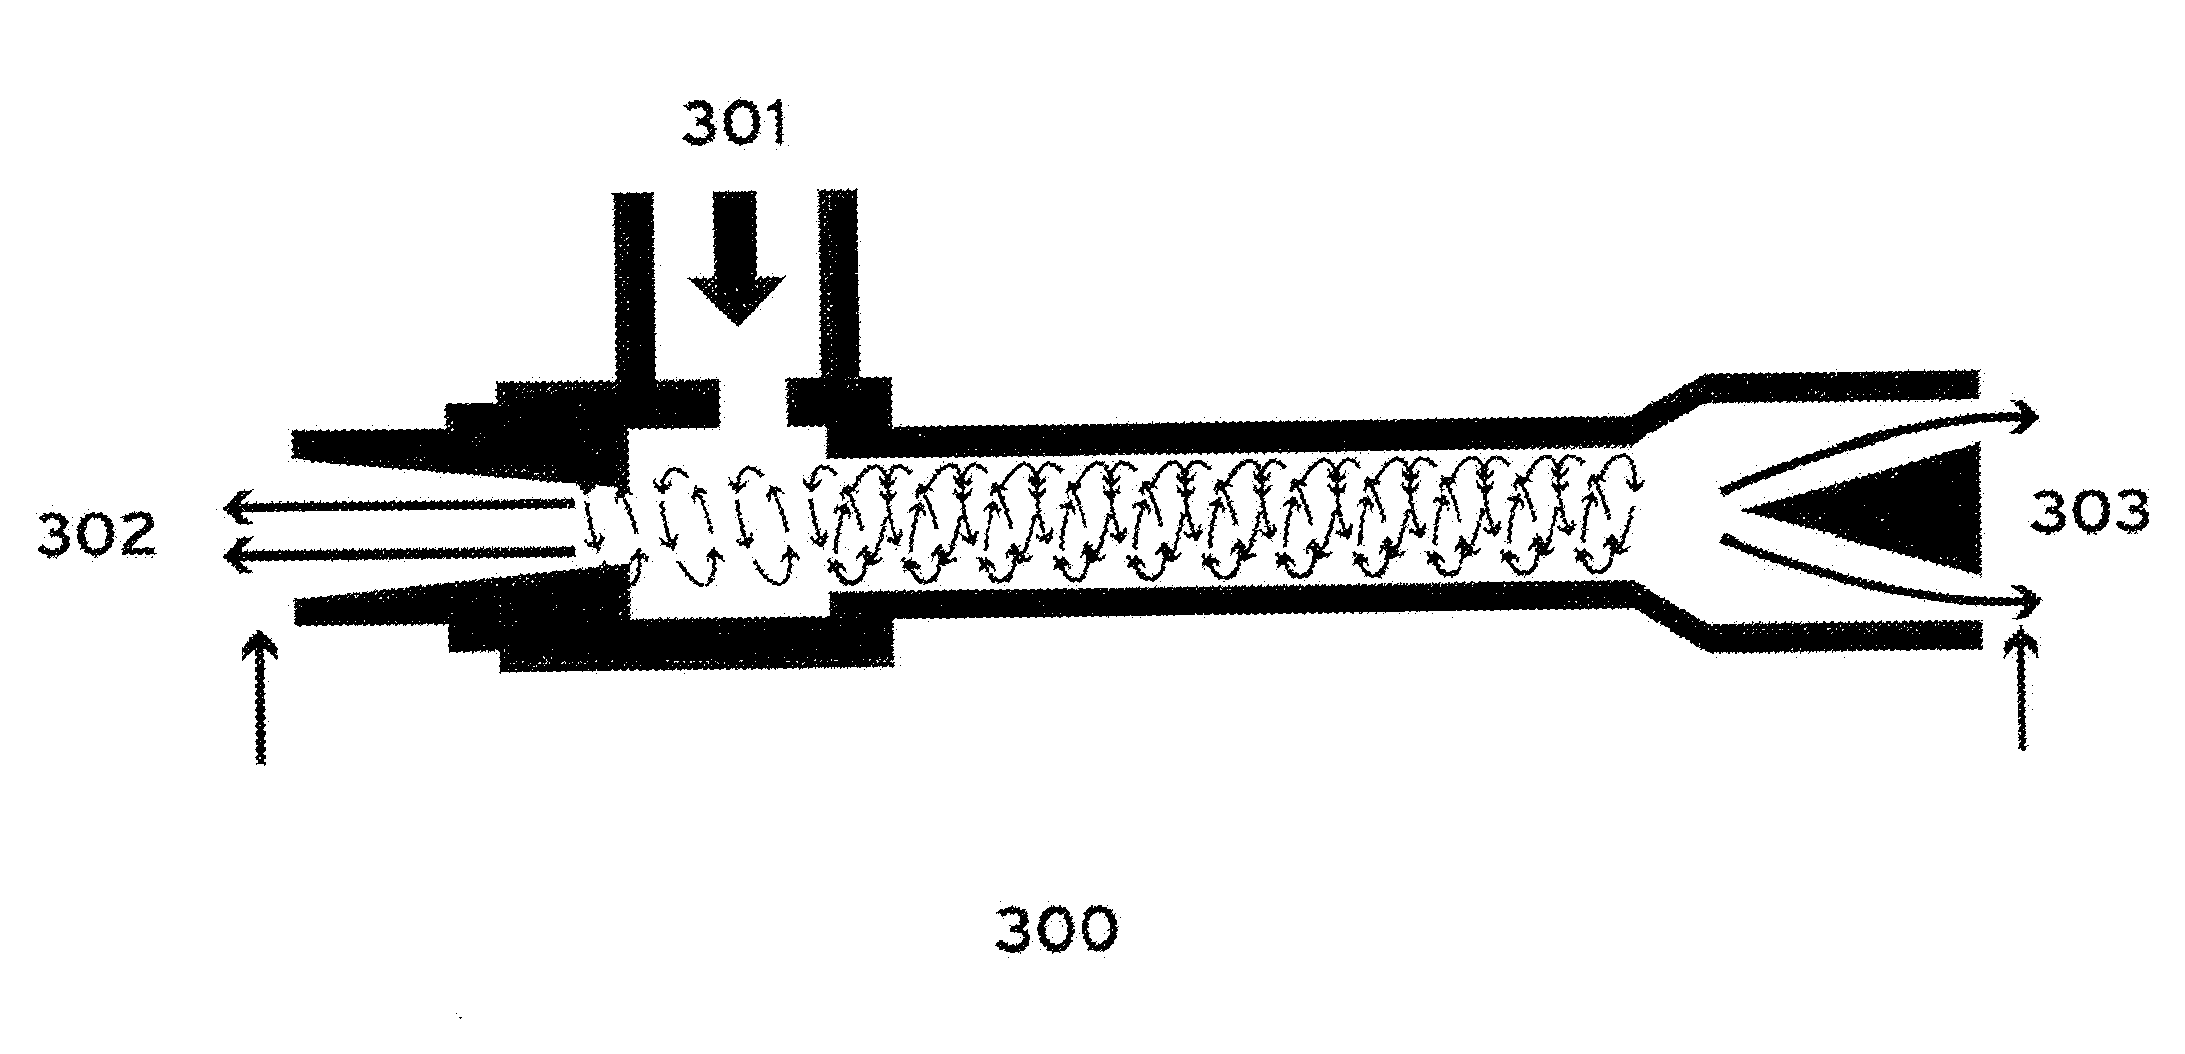 Apparatus and method for providing hydrogen at a high pressure